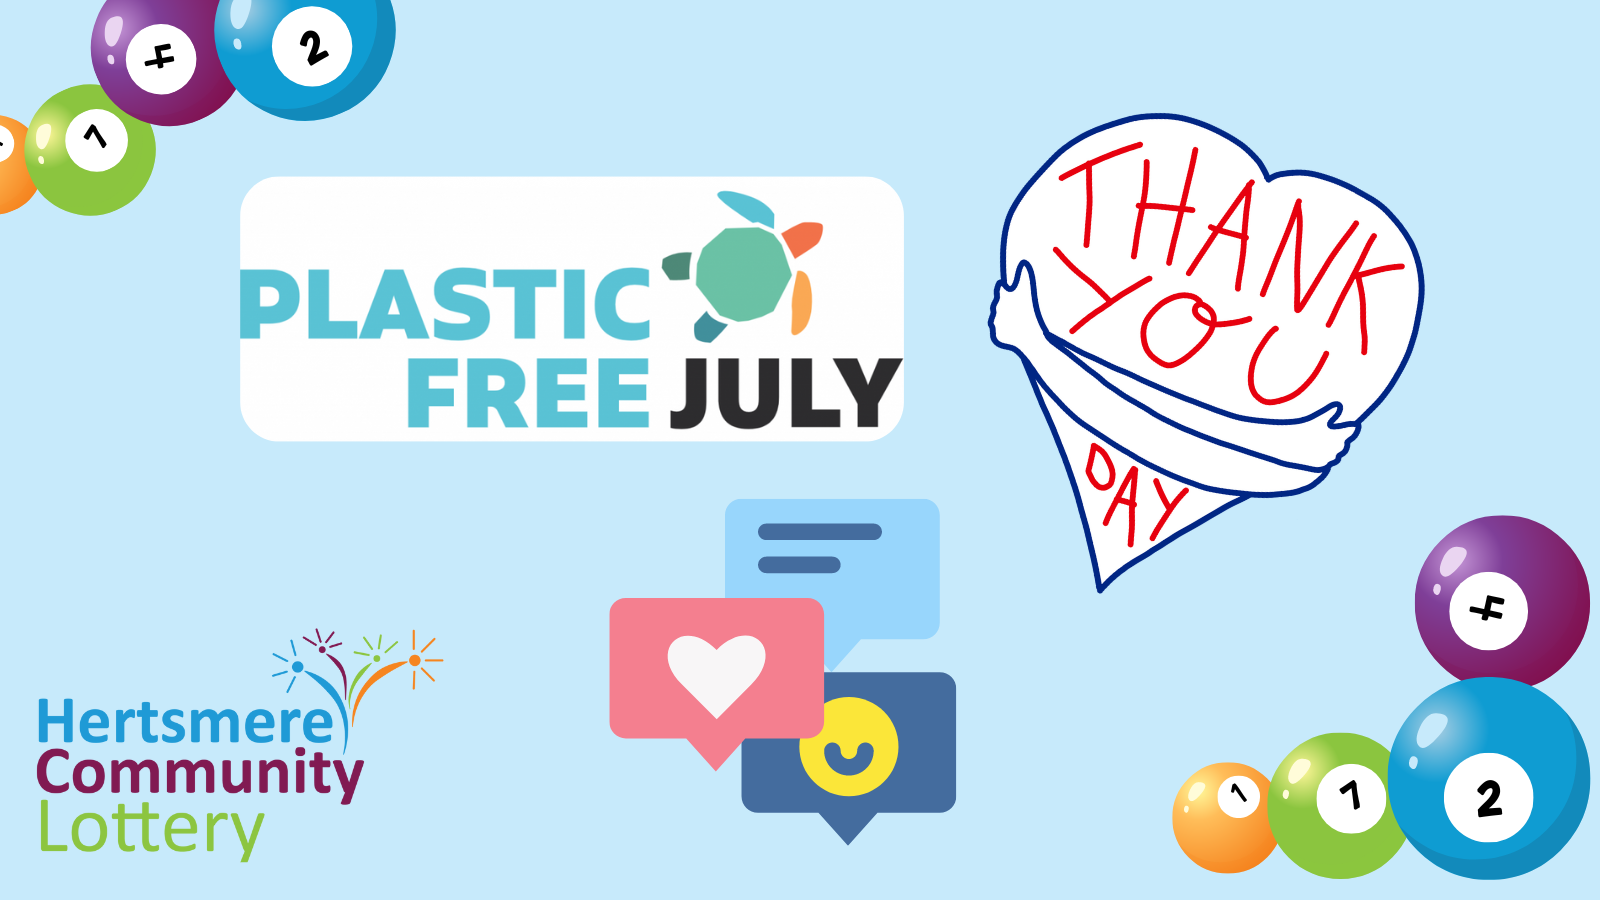 Plastic Free July campaign, Thank You day & Community Lottery logos. Some bingo balls on edges of the  infographic